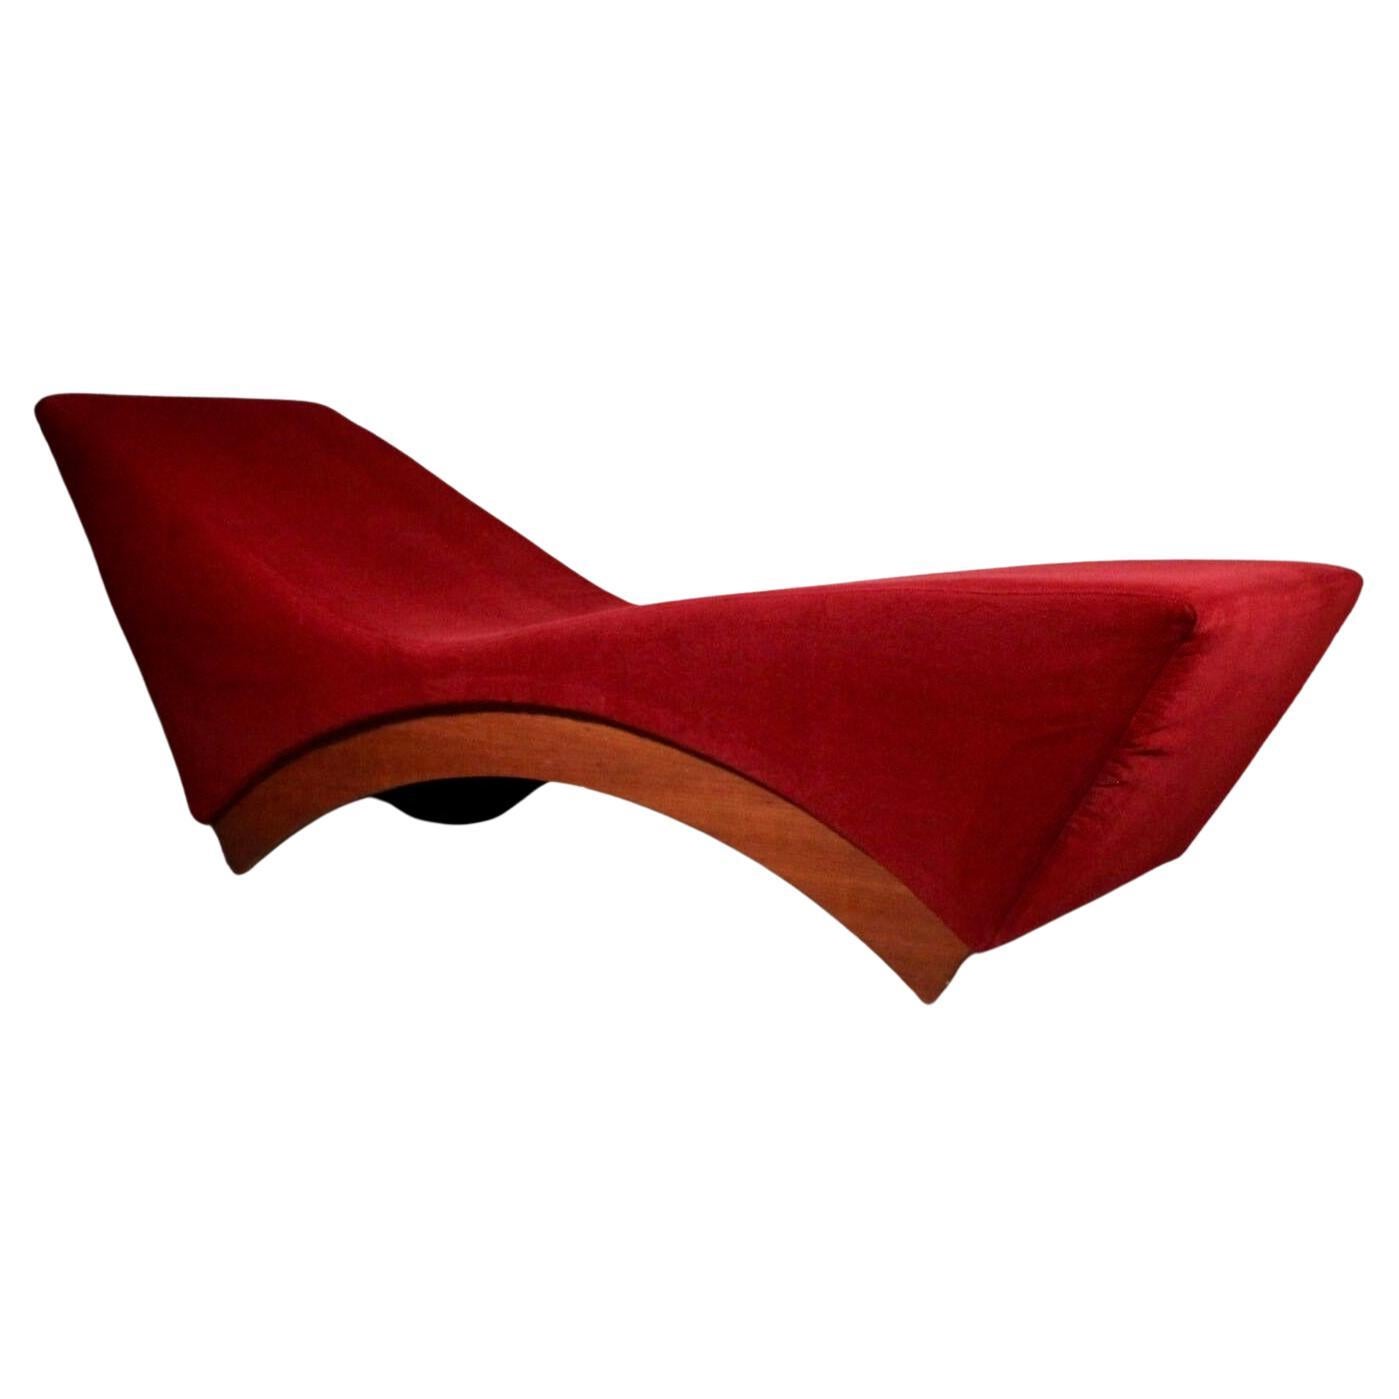 Red chaise longue, wood and fabric, 1970s For Sale